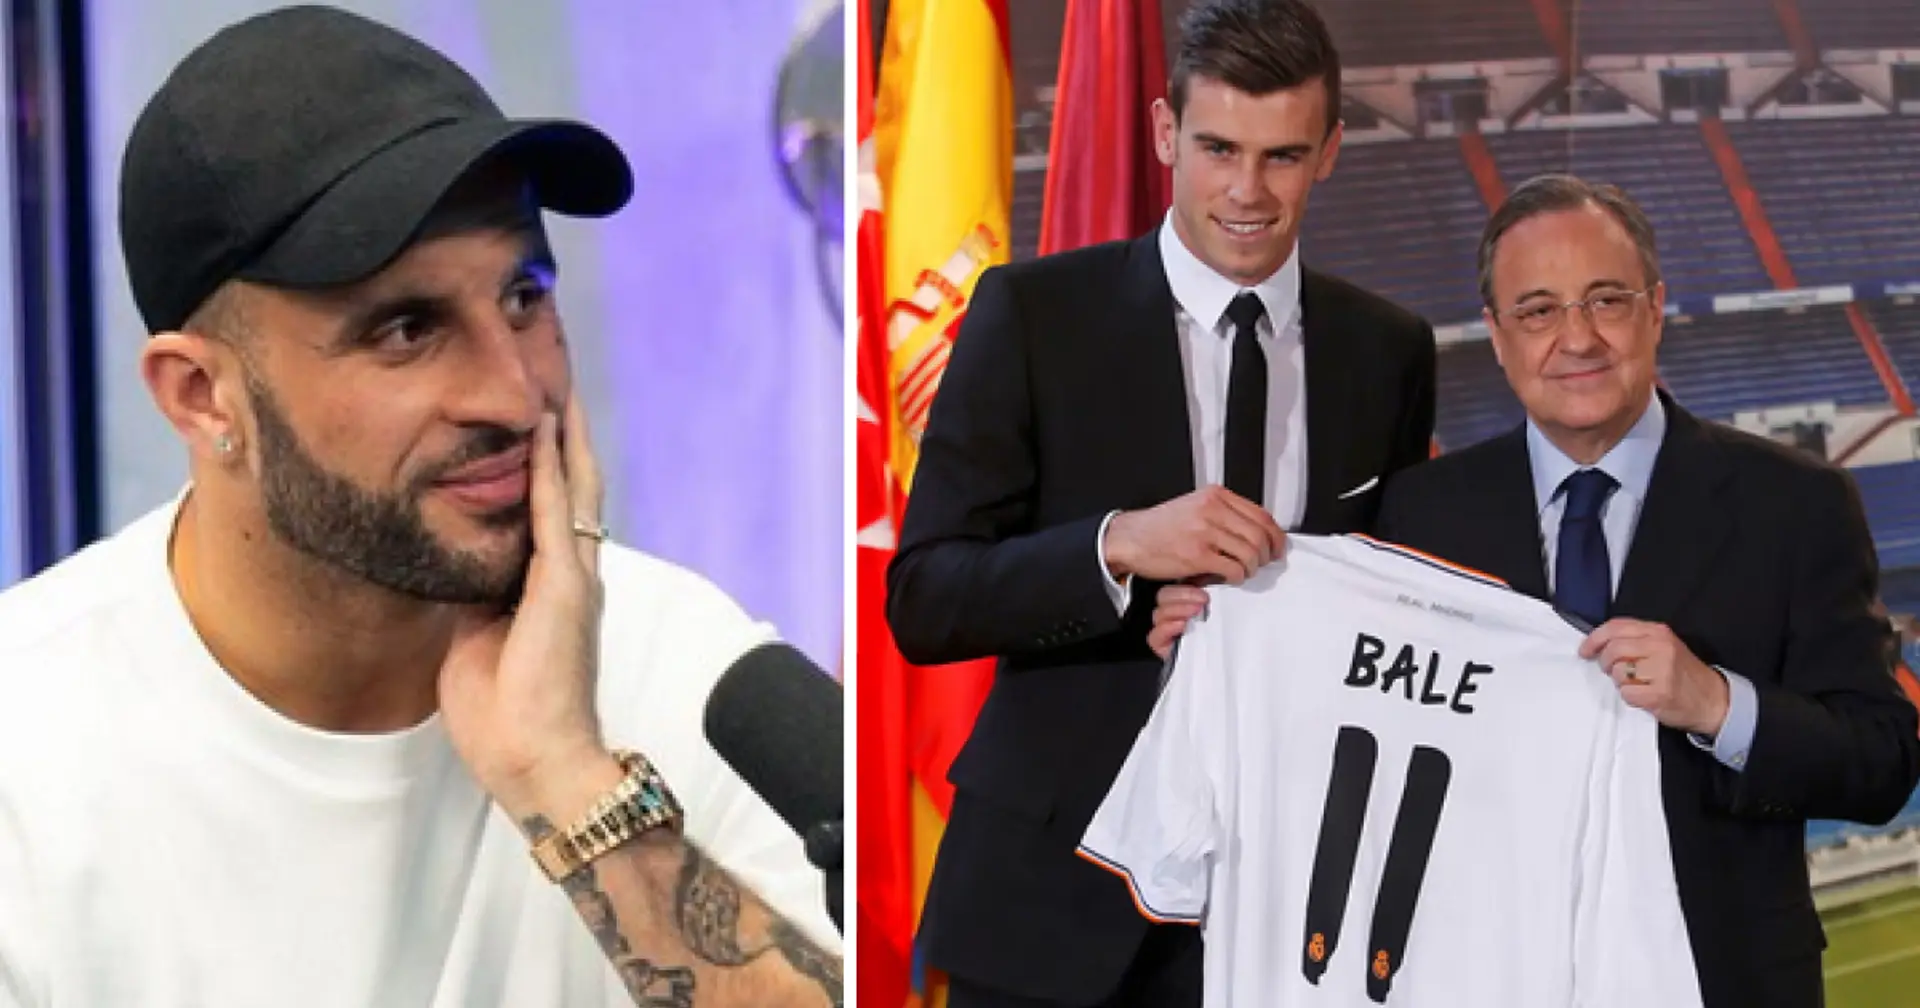 'It was incredible': Kyle Walker still shocked at what Bale did to secure Real Madrid move